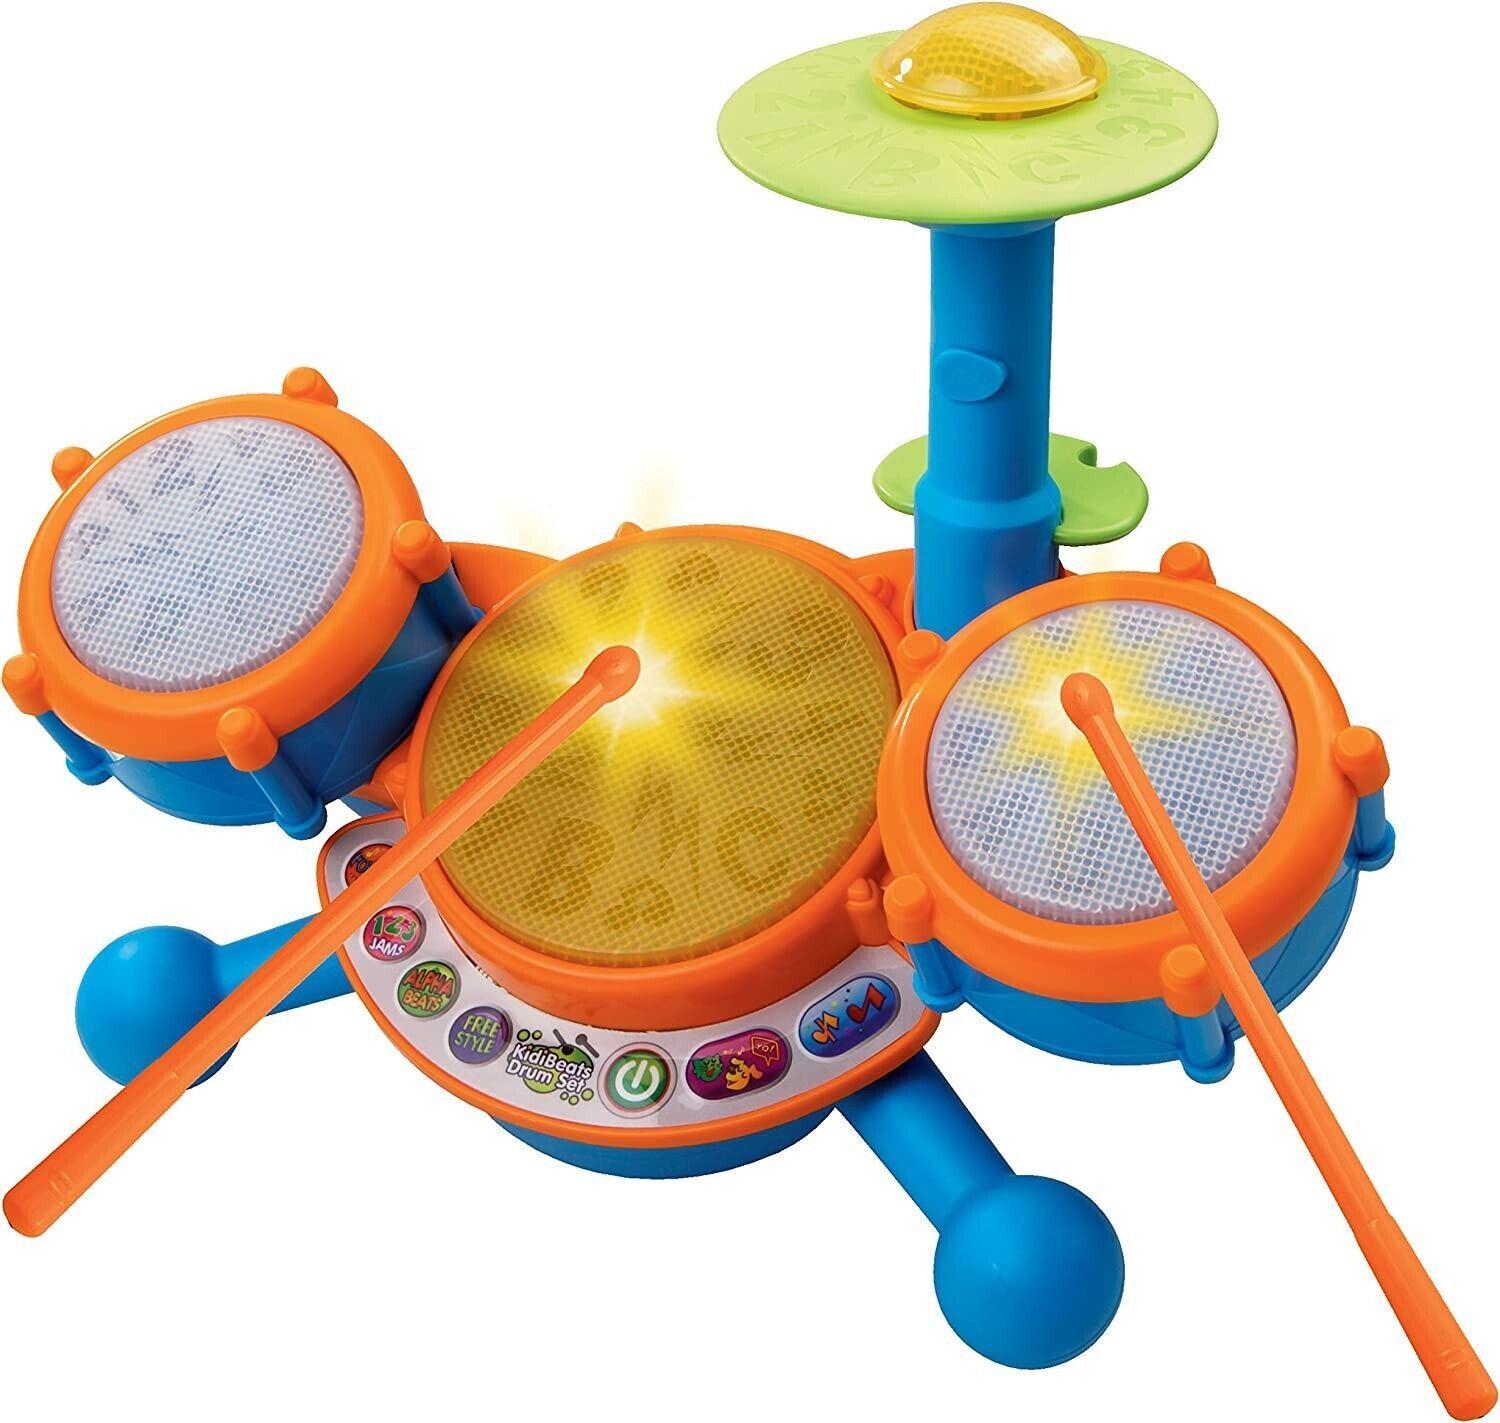 Kids Drum Set Lights Music Sounds Learning Toddler Educational Fun Toy Gift